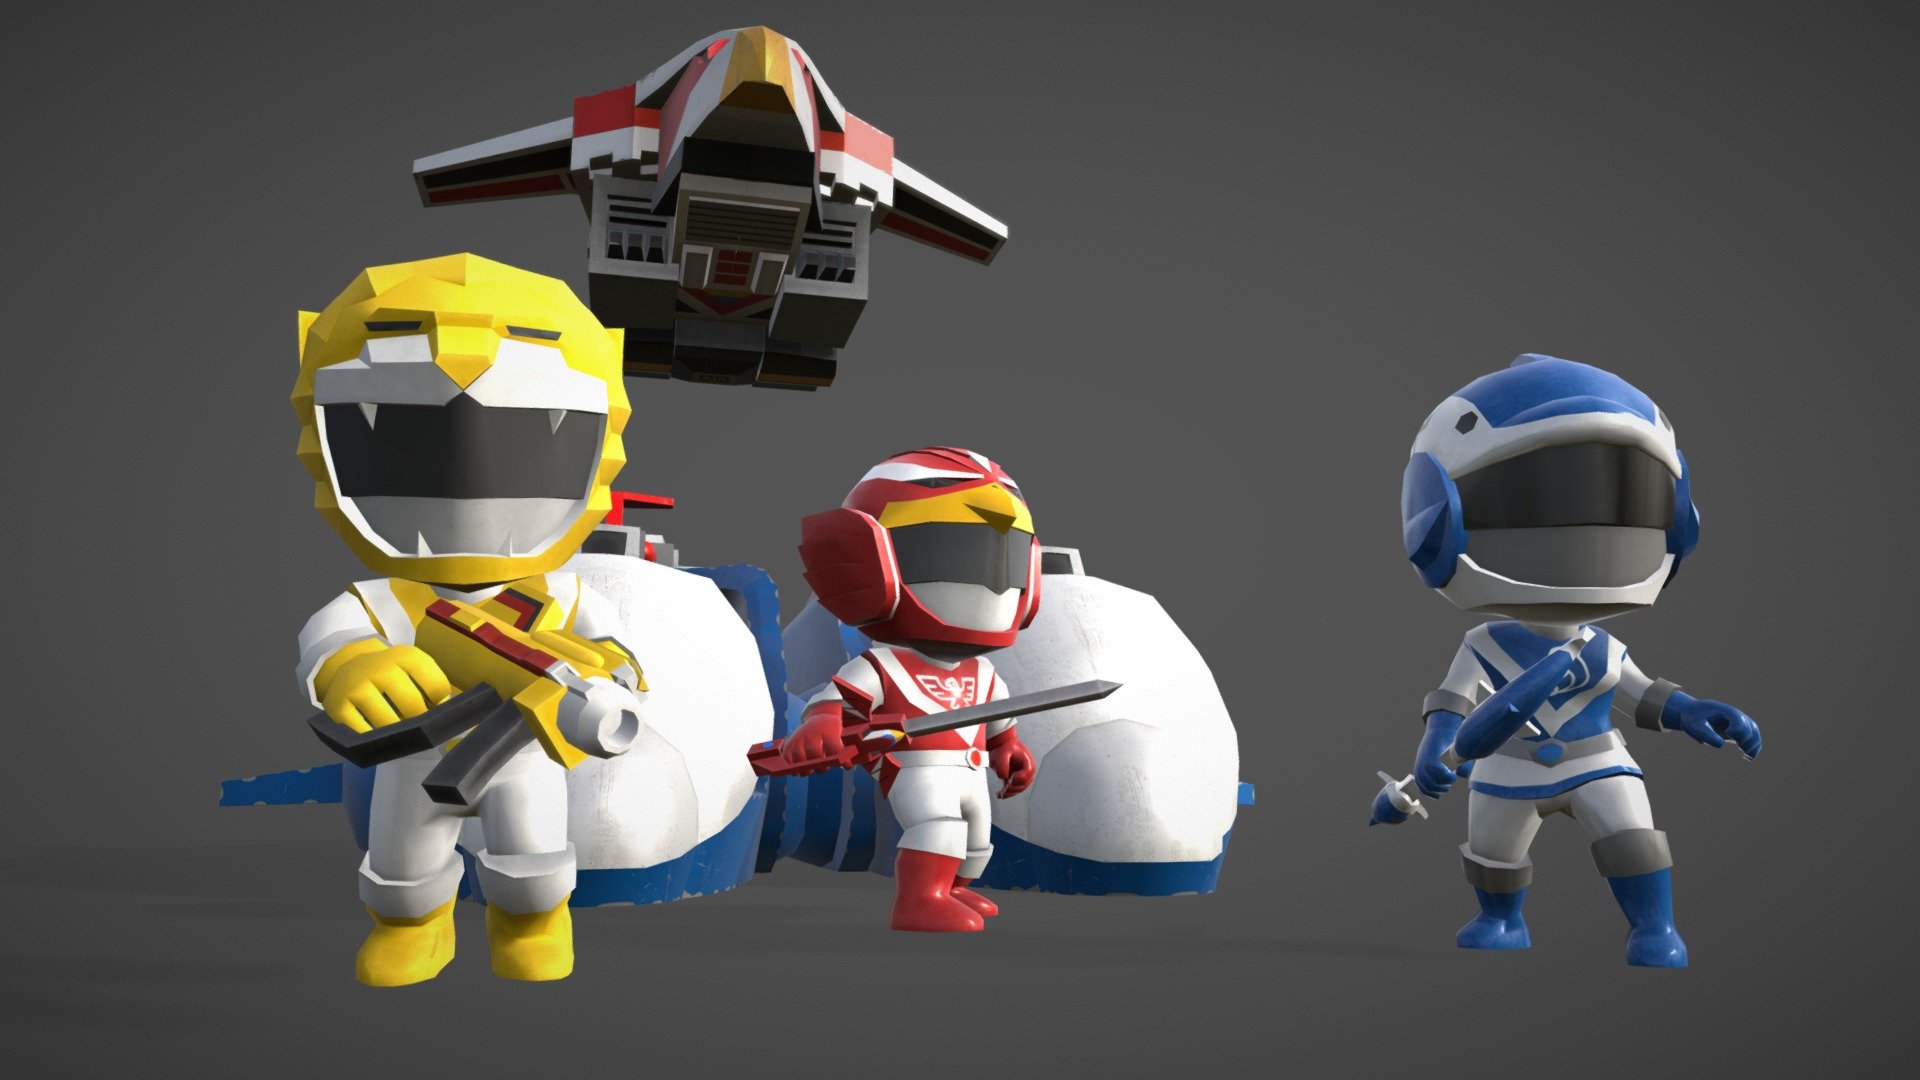 Low Poly characters from the 1988 show: Liveman.
Animated, rigged, textured, and ready to use! - Liveman Bioman - Buy Royalty Free 3D model by Marcos Faci (@marcosfaci) 3d model